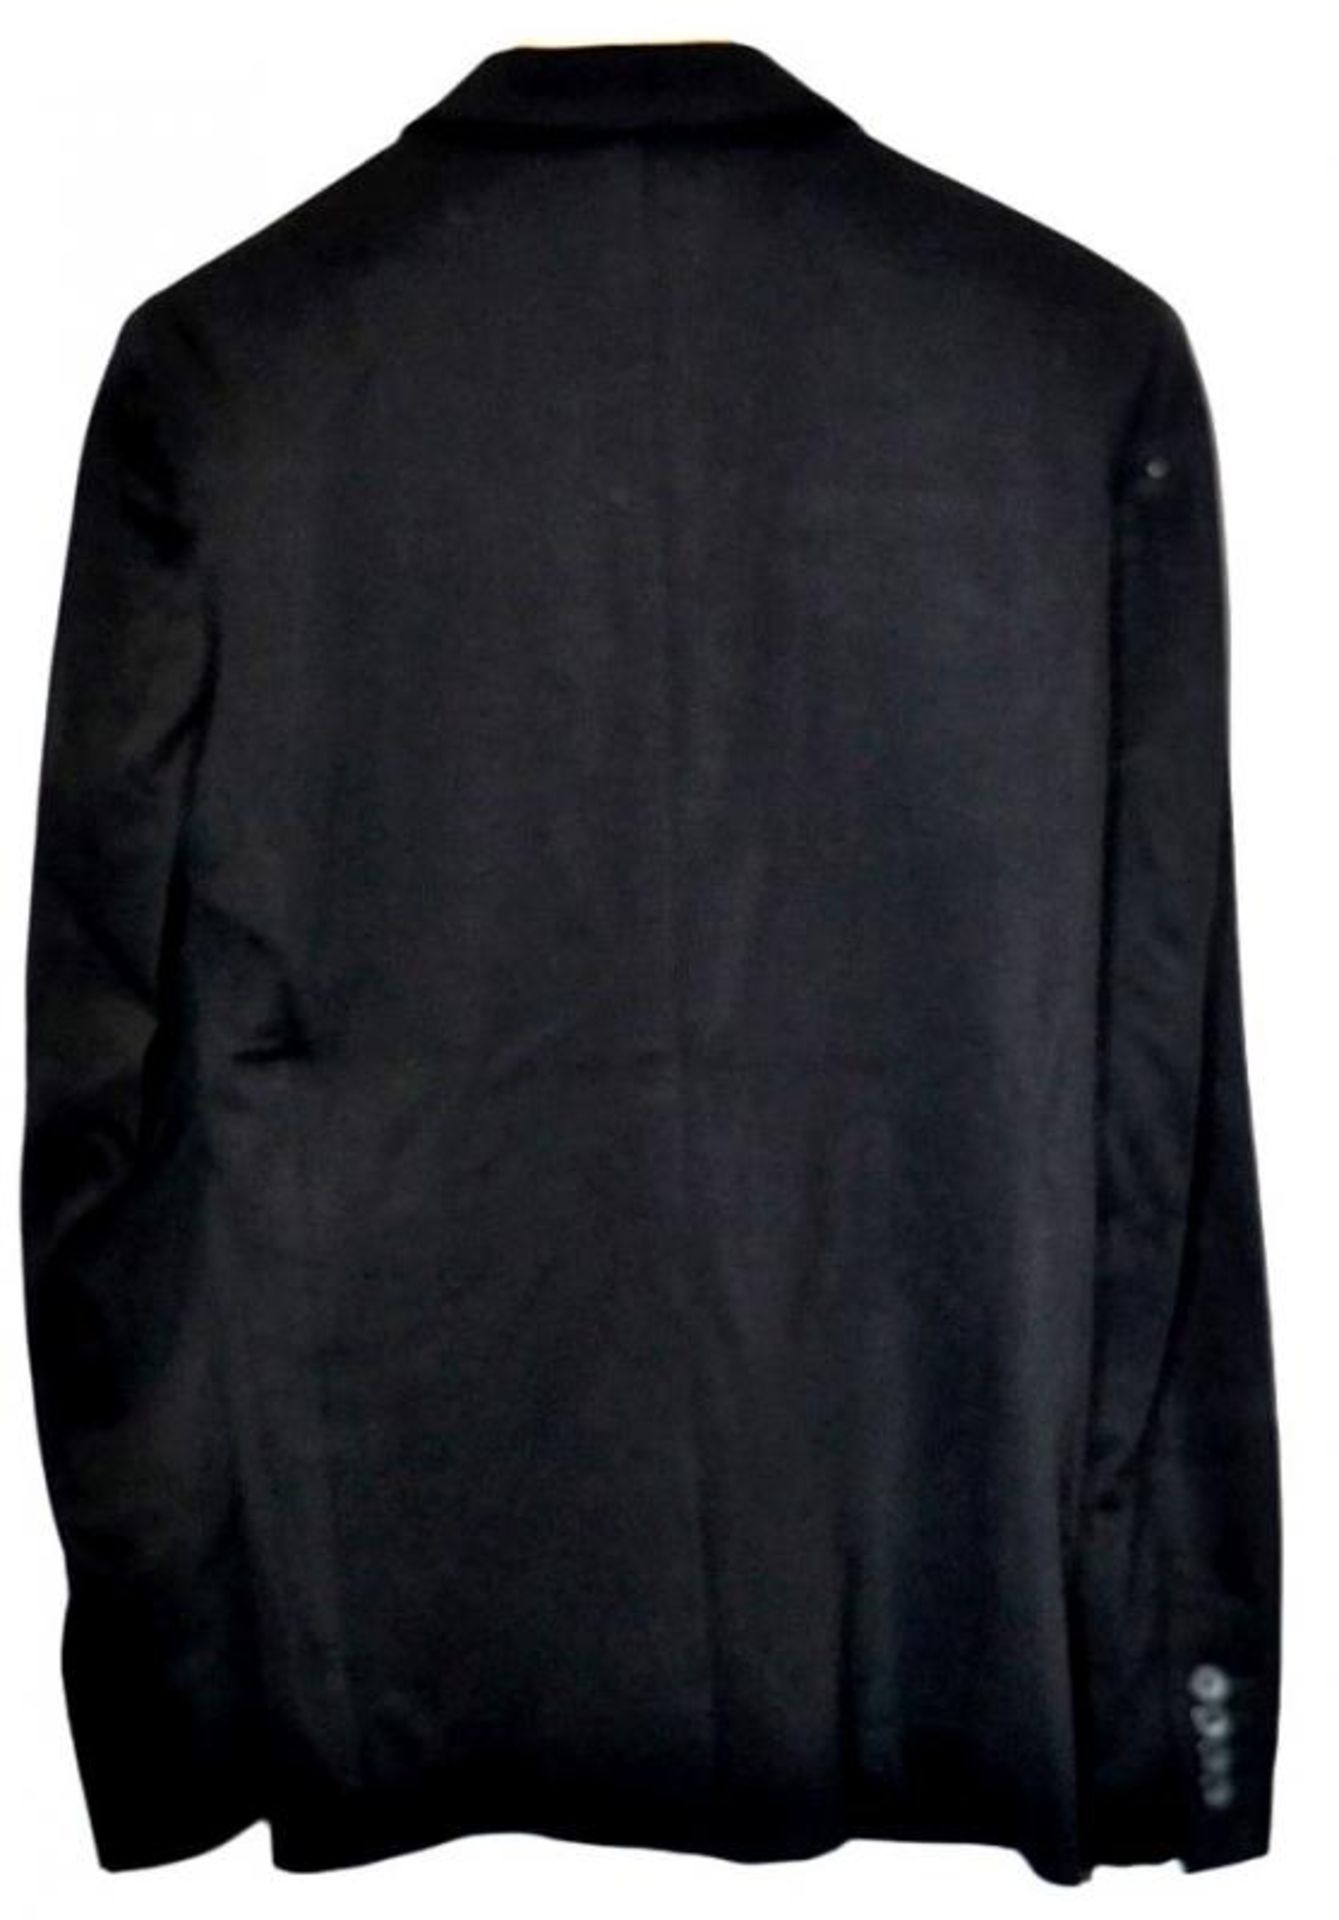 1 x PRE END Branded "Dom" Mens Blazer Jacket - New Stock With Tags - Recent Store Closure - - Image 2 of 4